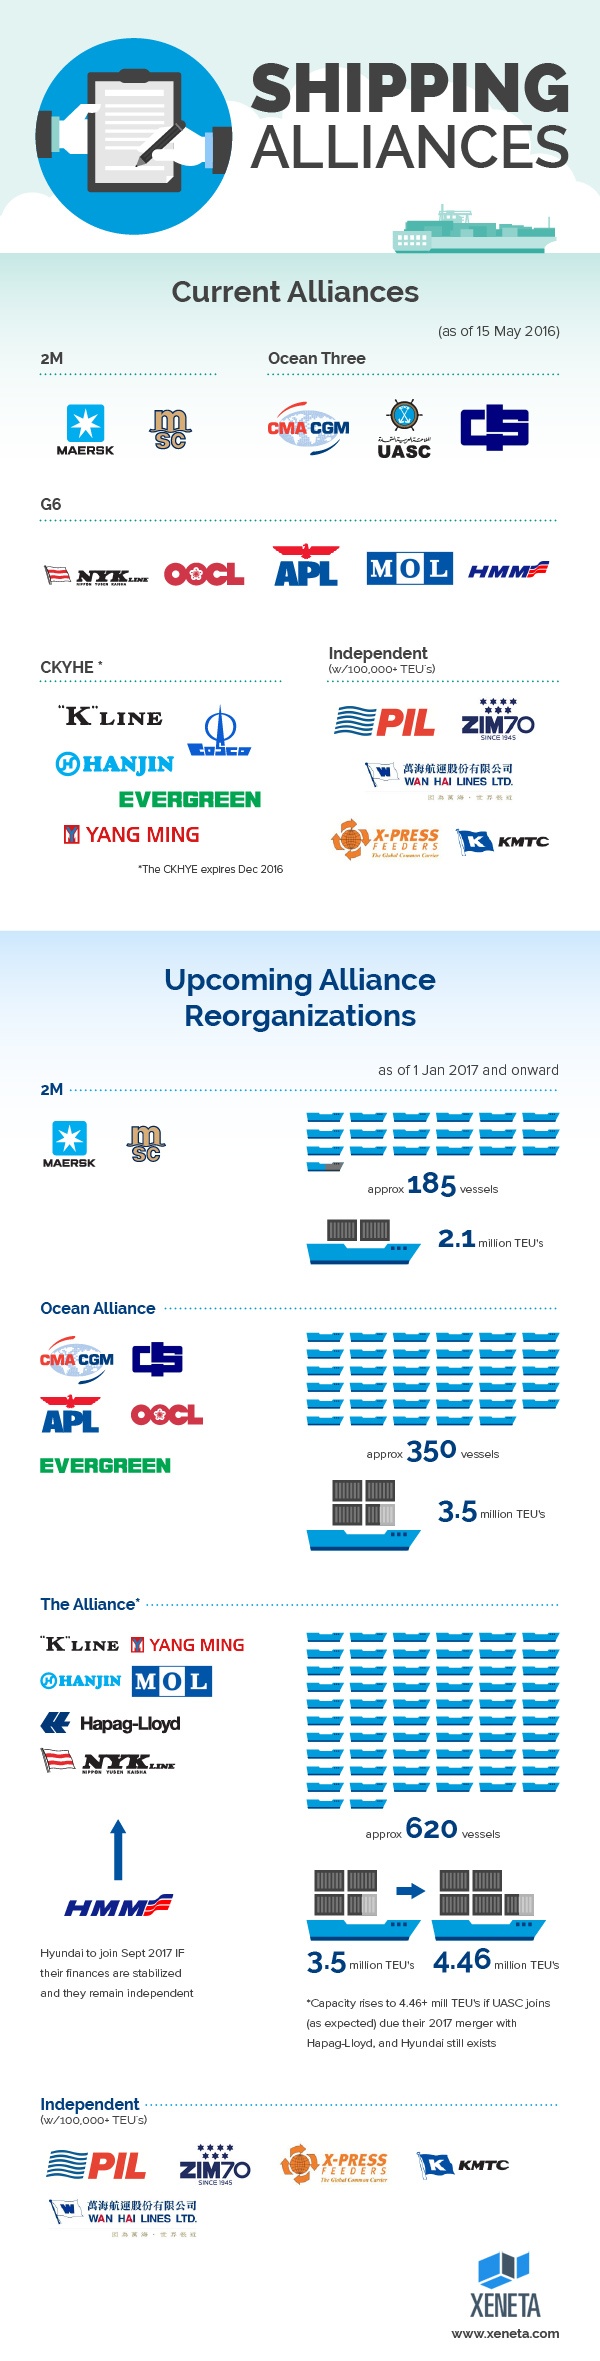 Shipping Alliances Overview